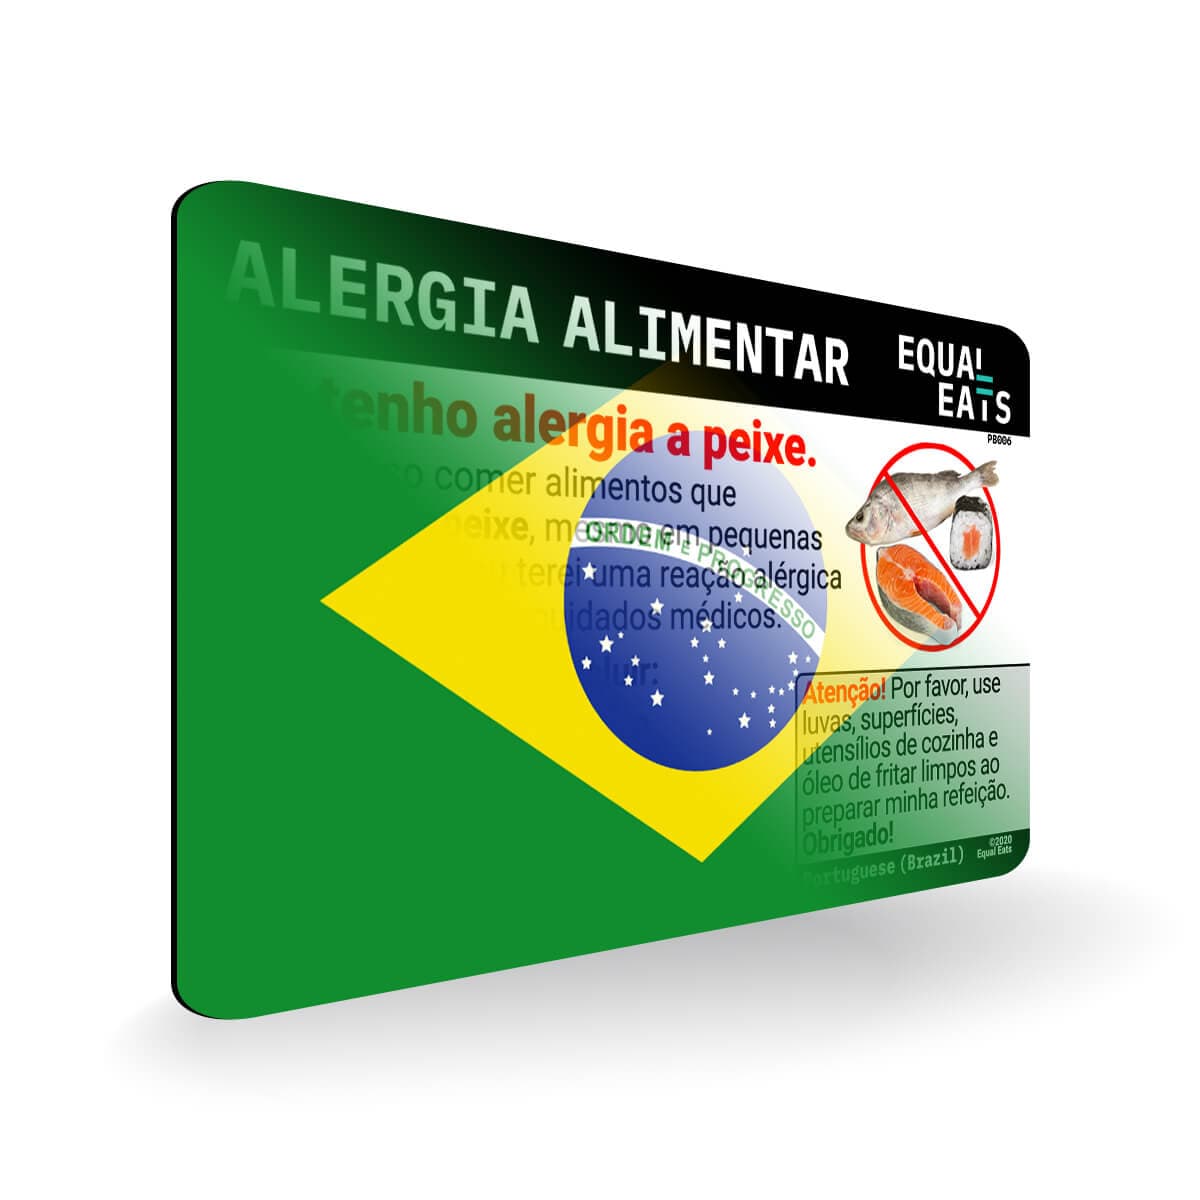 Fish Allergy in Portuguese. Fish Allergy Card for Brazil